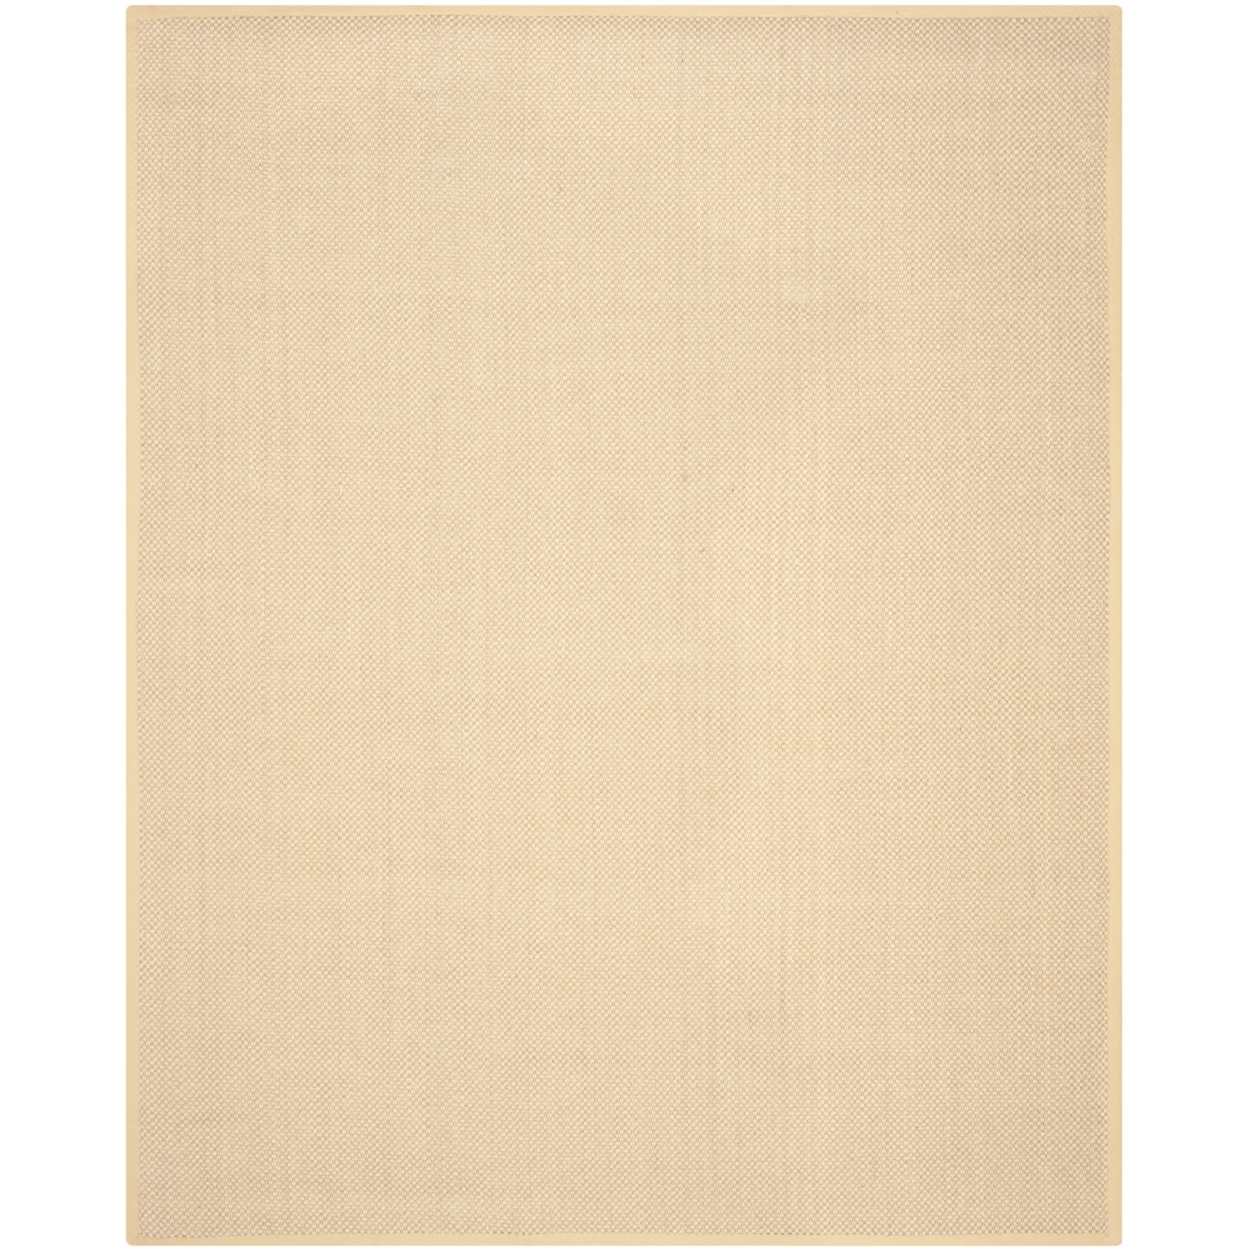 SAFAVIEH Natural Fiber Collection NF443A Maize/Wheat Rug - 9' X 12'